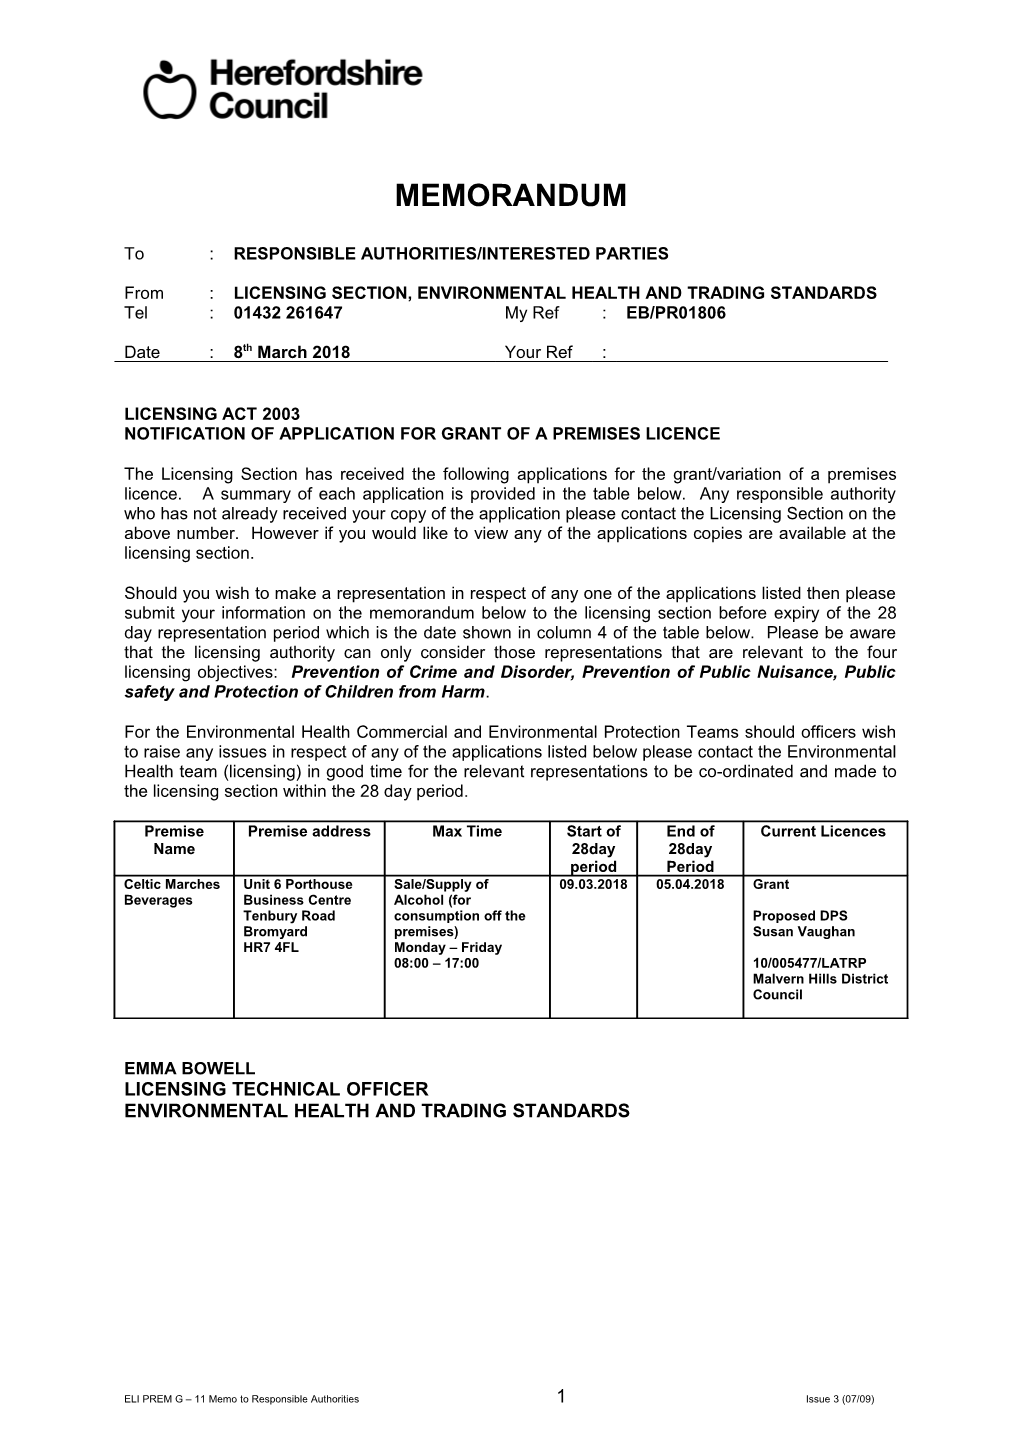 LICENSING ACT 2003 Notification of APPLICATION for Grant of a PREMISES LICENCE